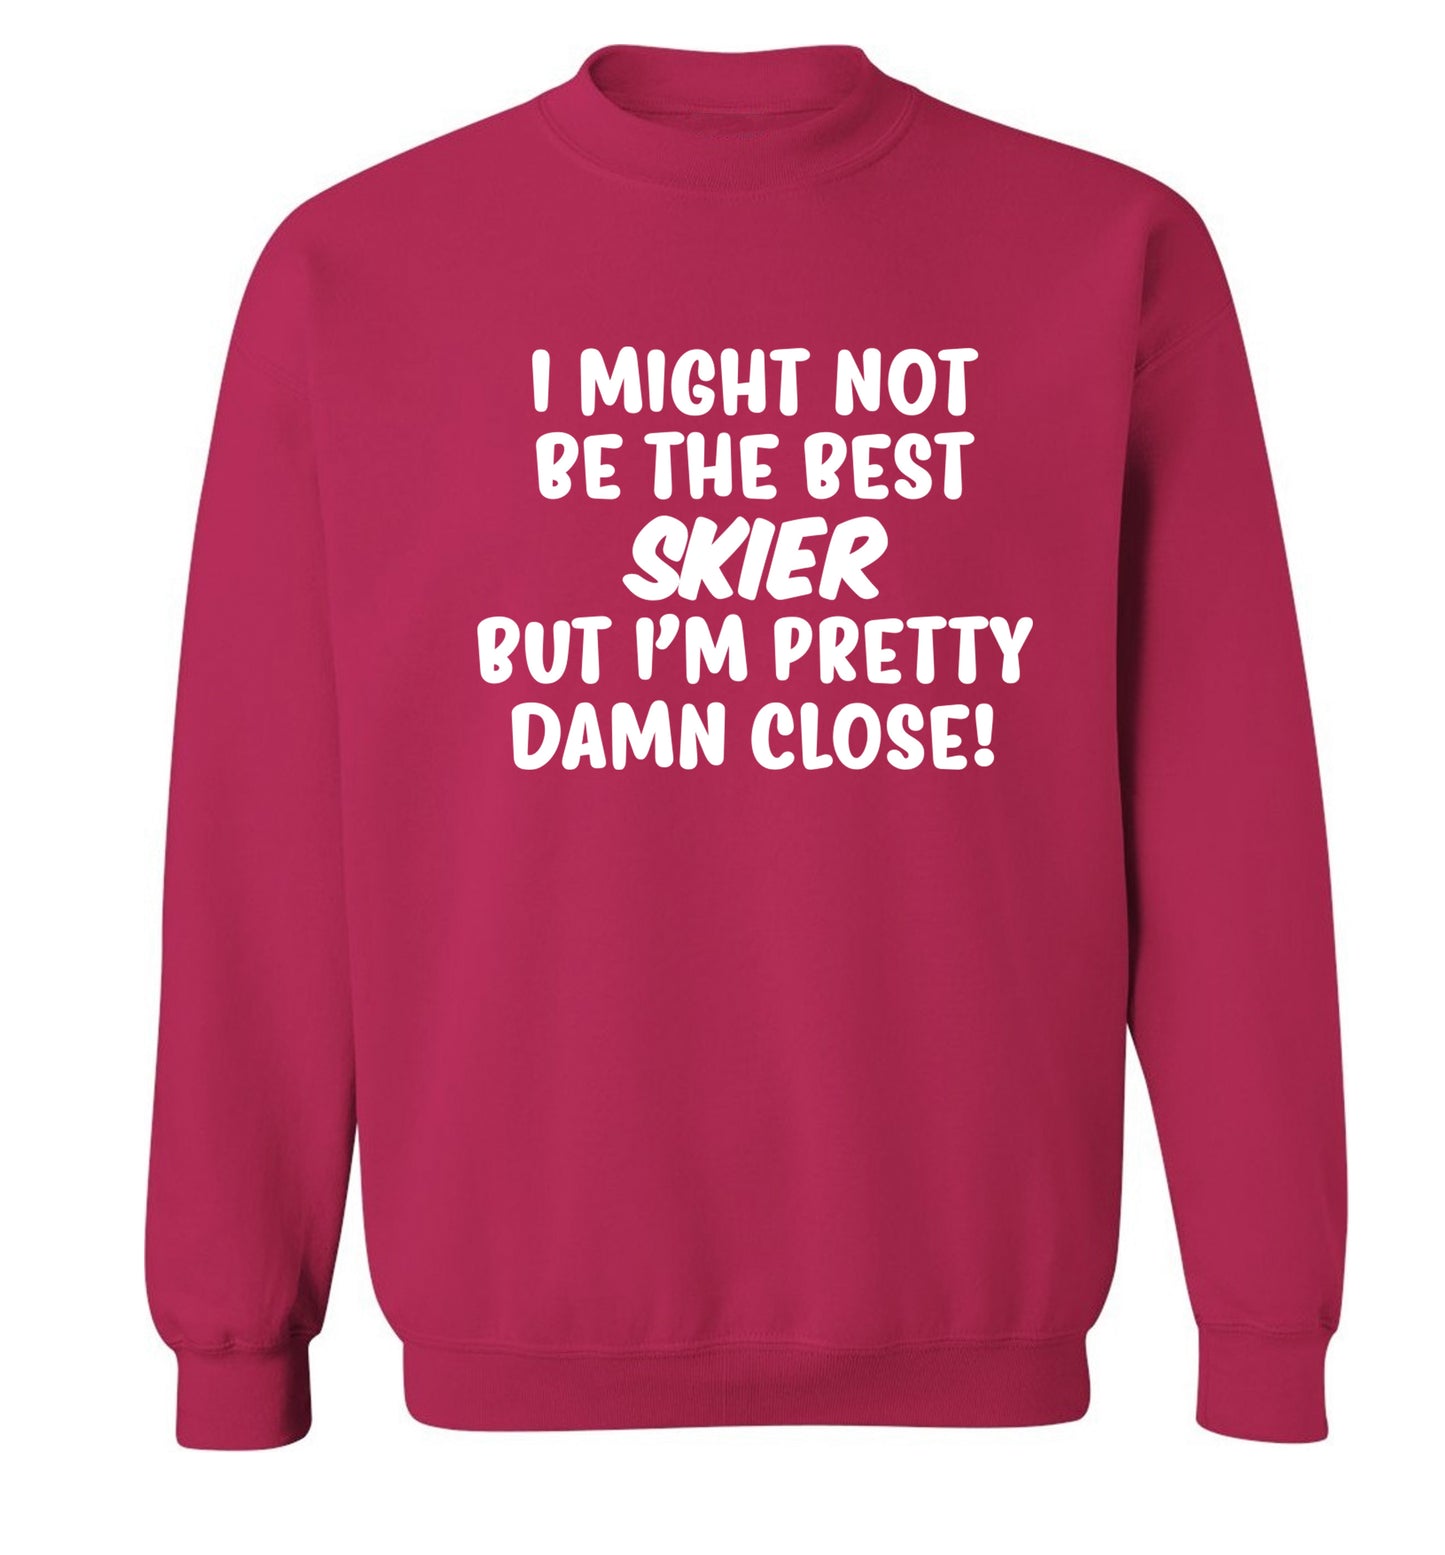 I might not be the best skier but I'm pretty damn close! Adult's unisexpink Sweater 2XL